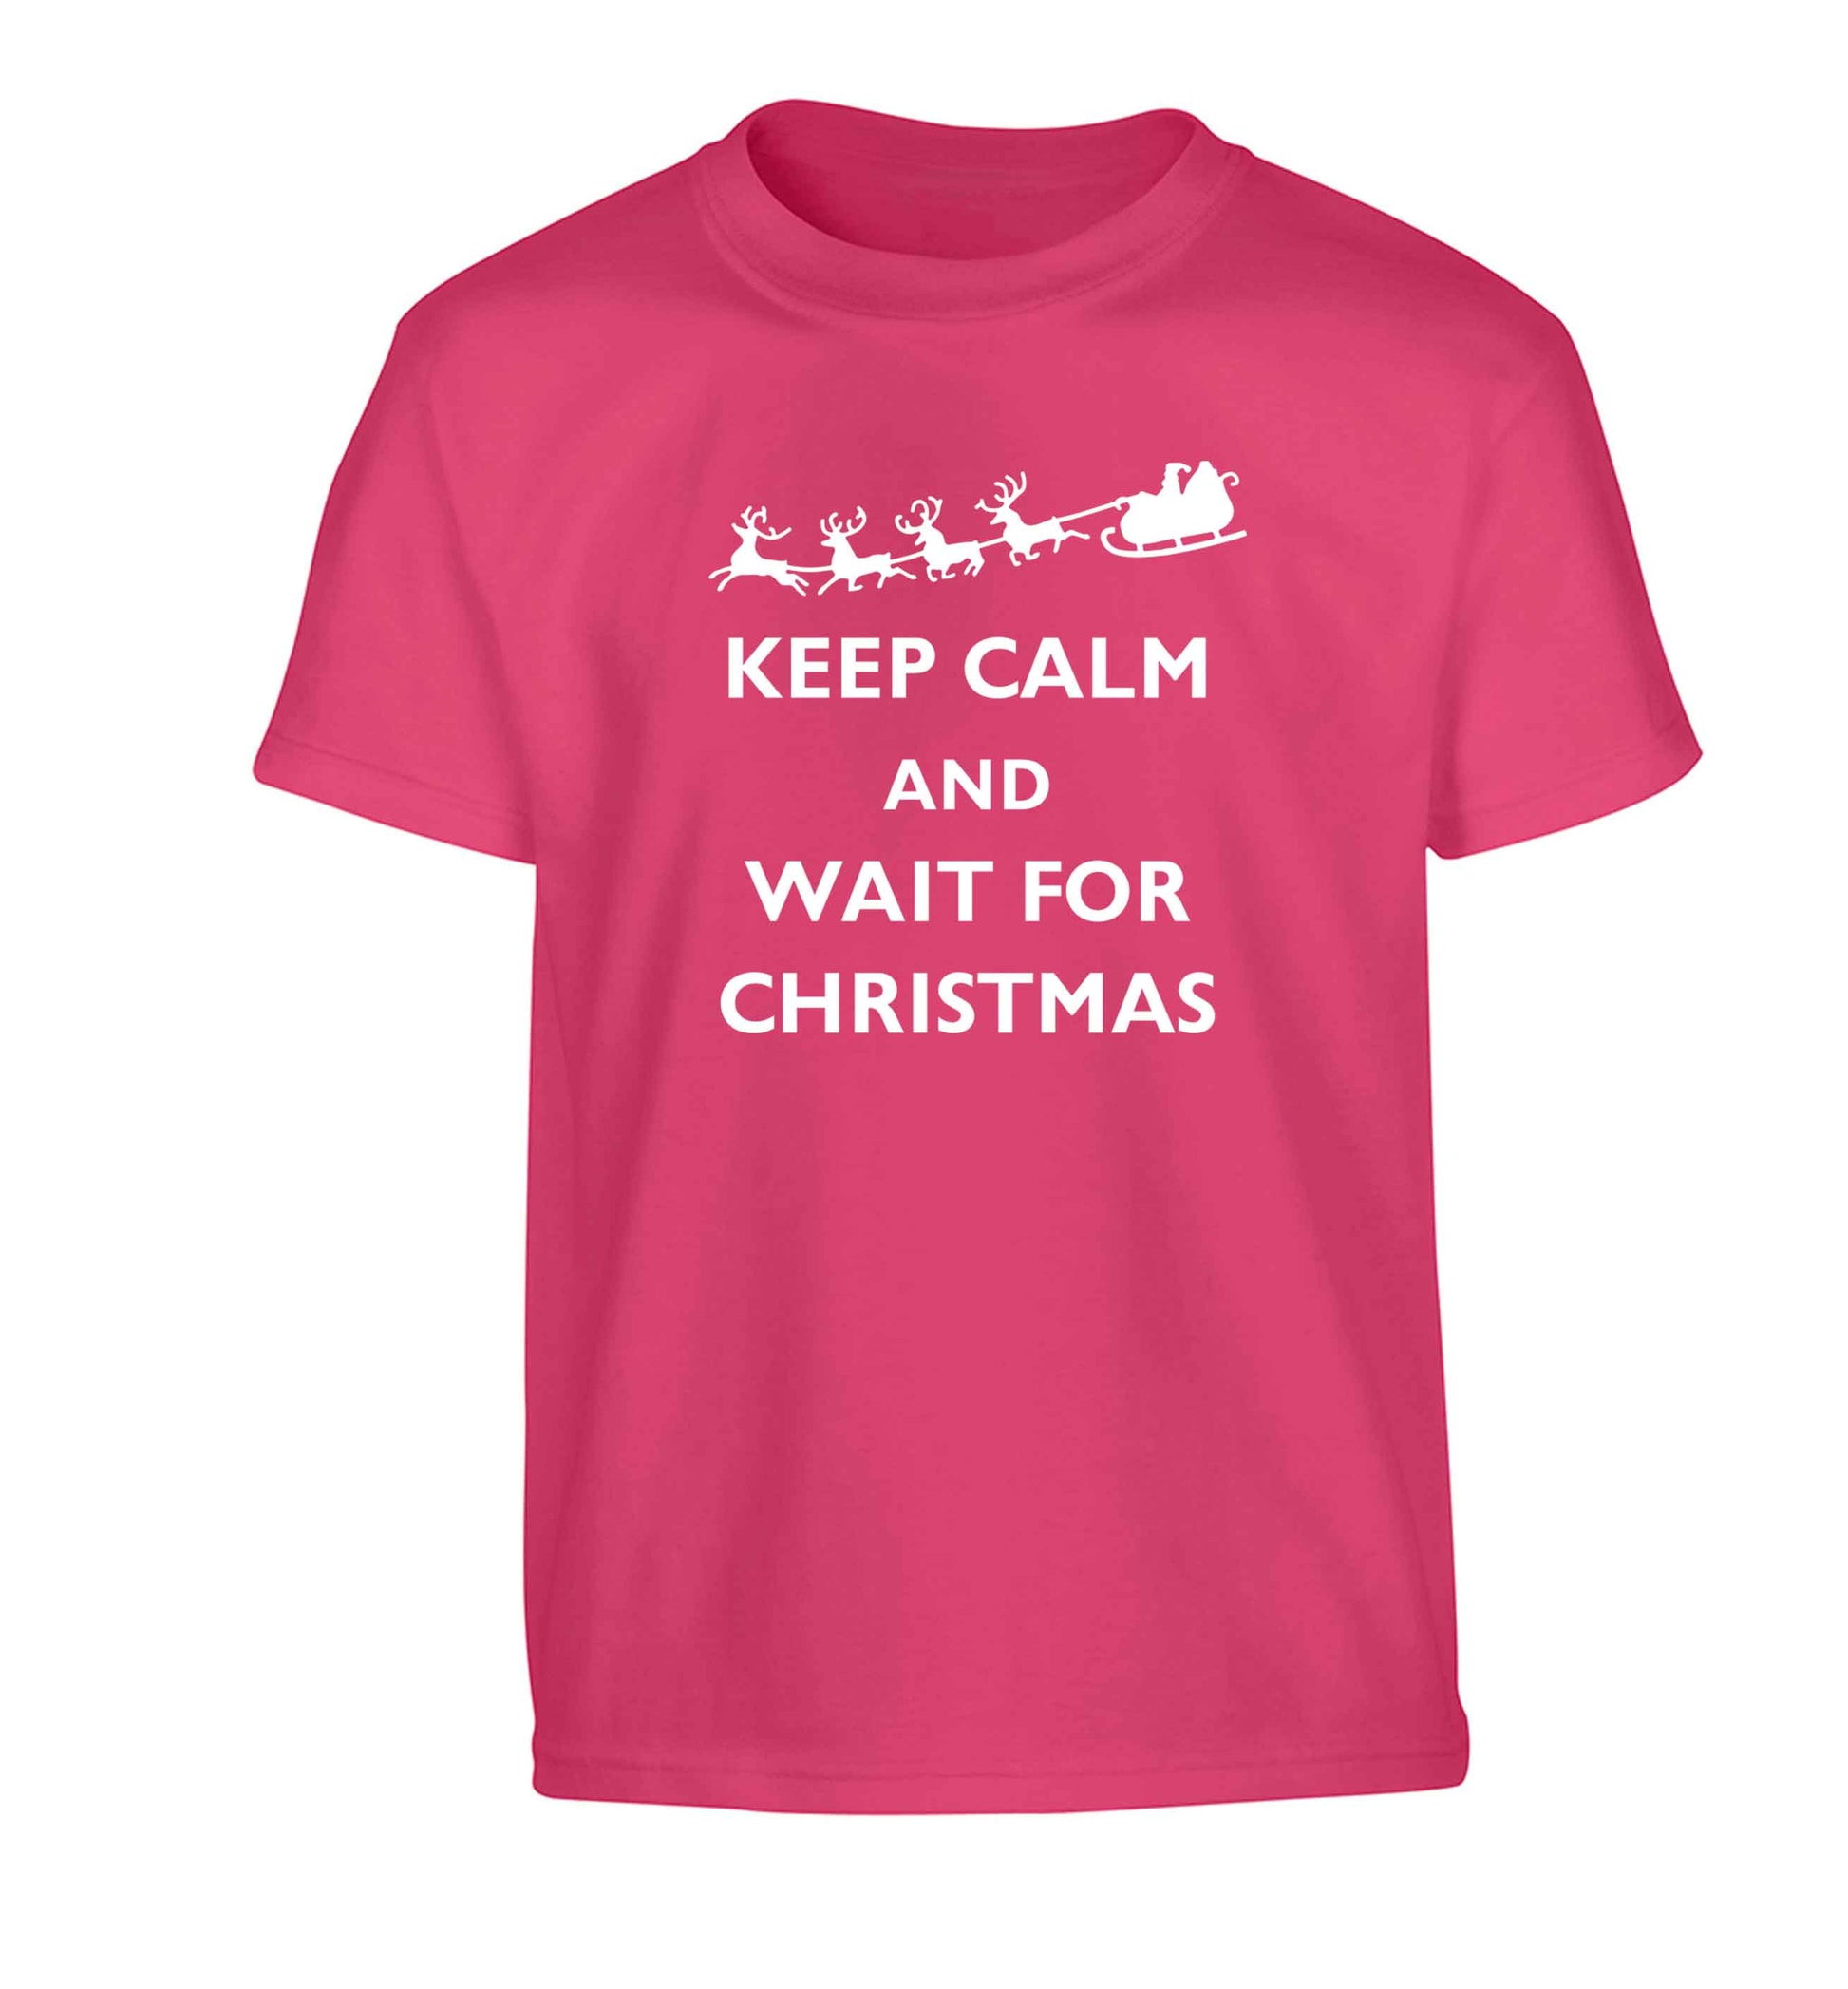 Keep calm and wait for Christmas Children's pink Tshirt 12-13 Years